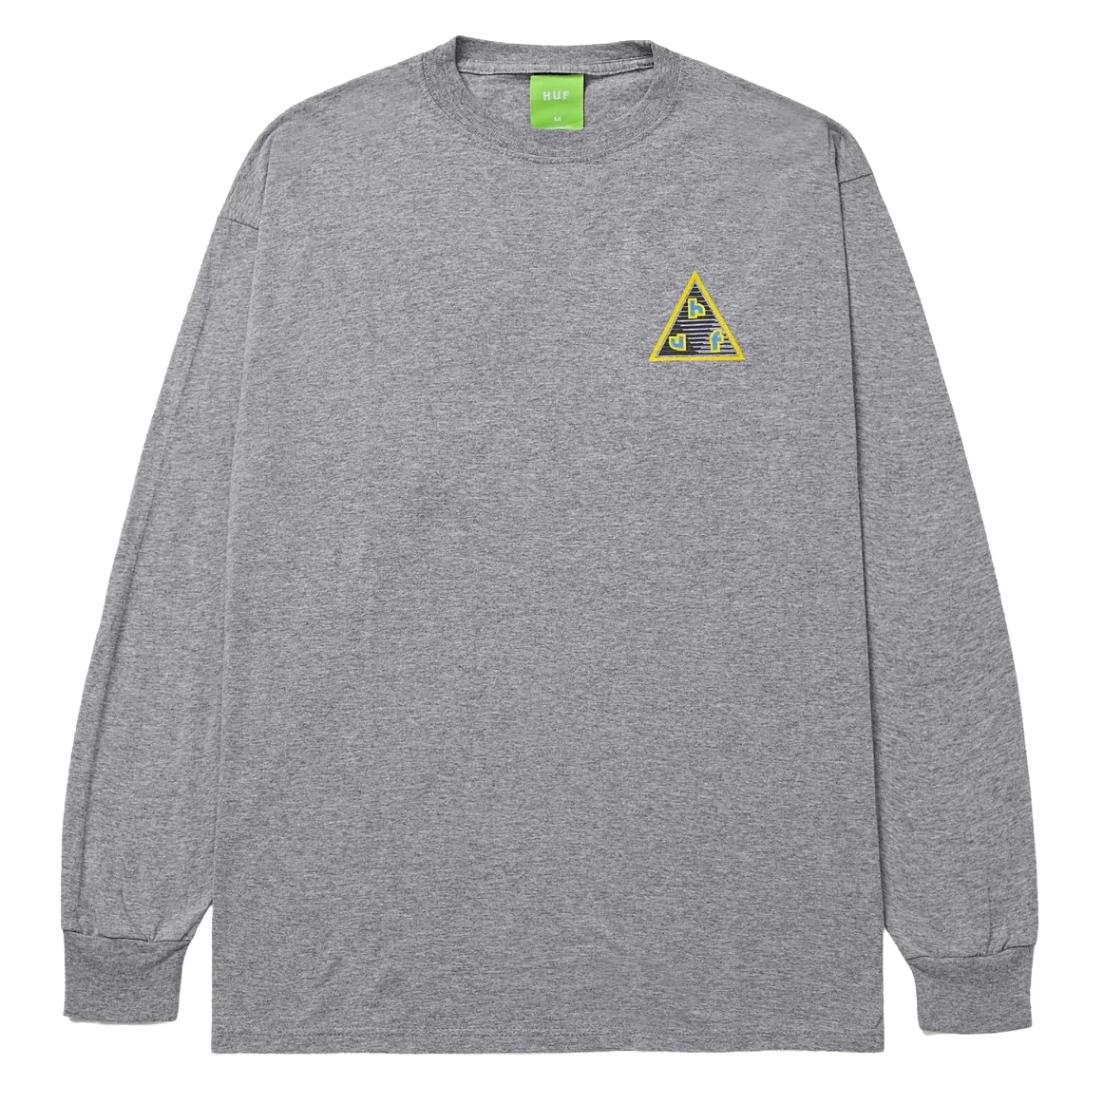 Huf High Adventure Long Sleeve T-Shirt - Athletic Grey - Mens Graphic T-Shirt by Huf